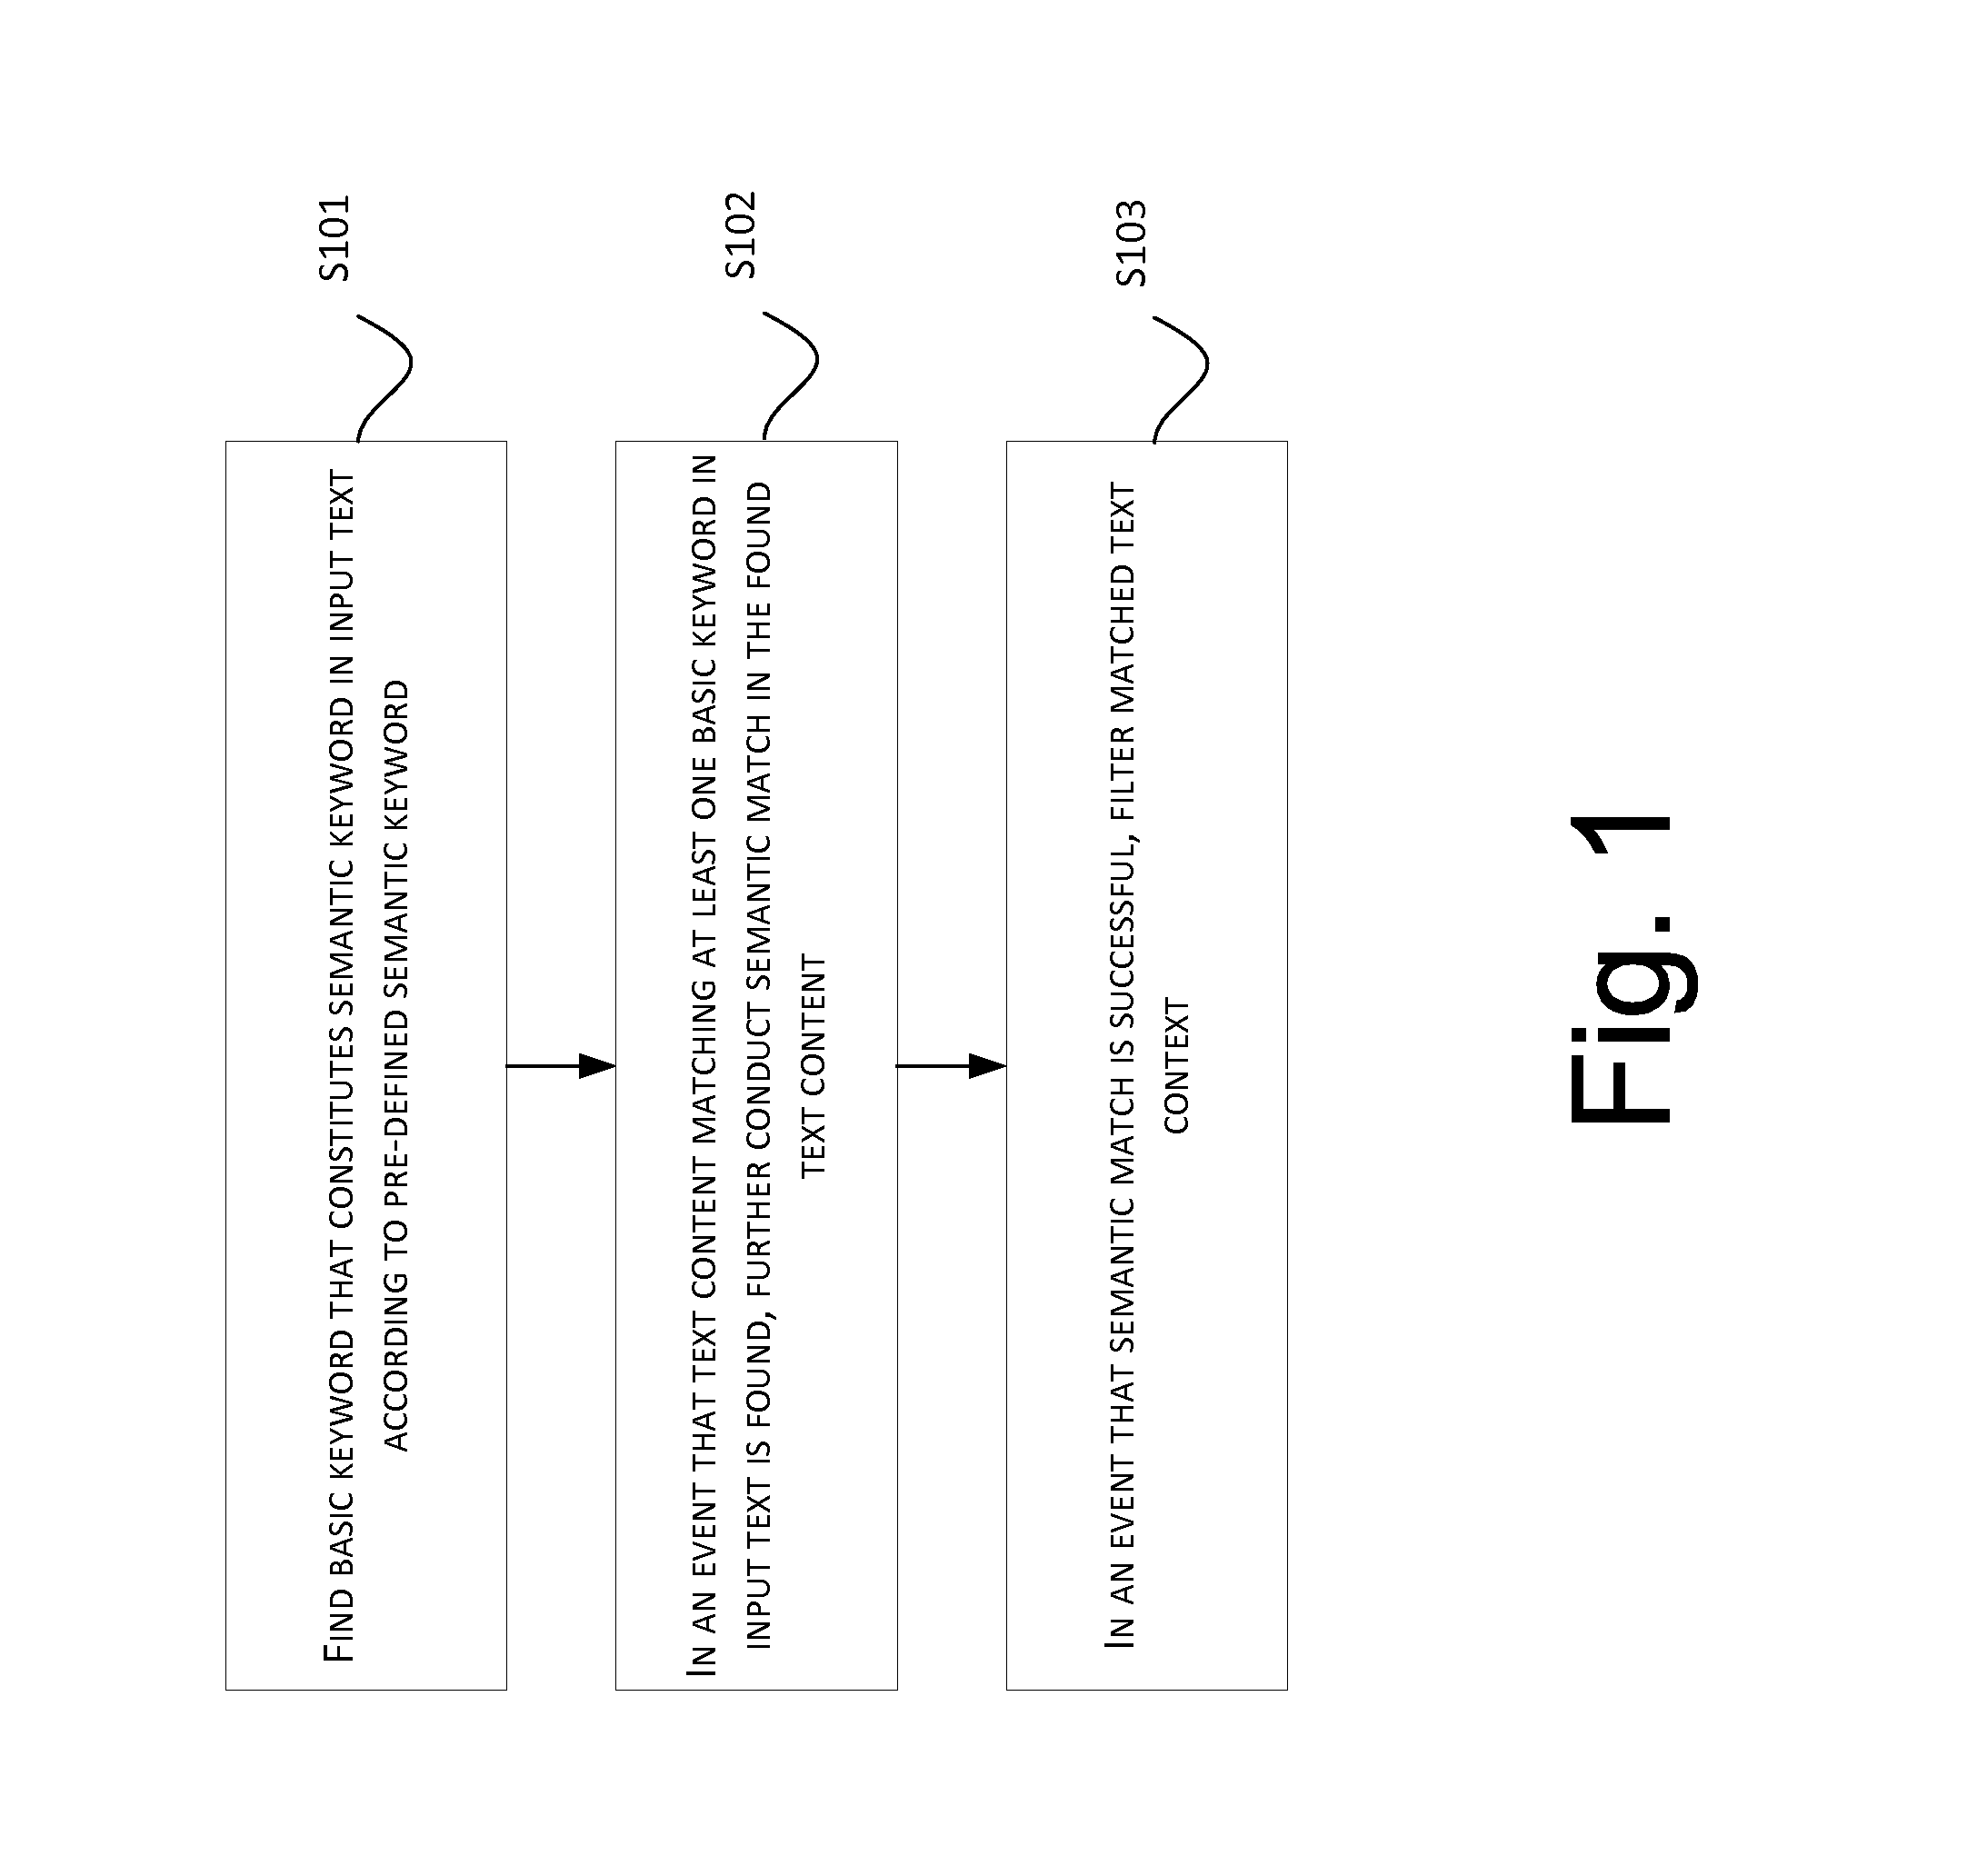 Method and System for Text Filtering